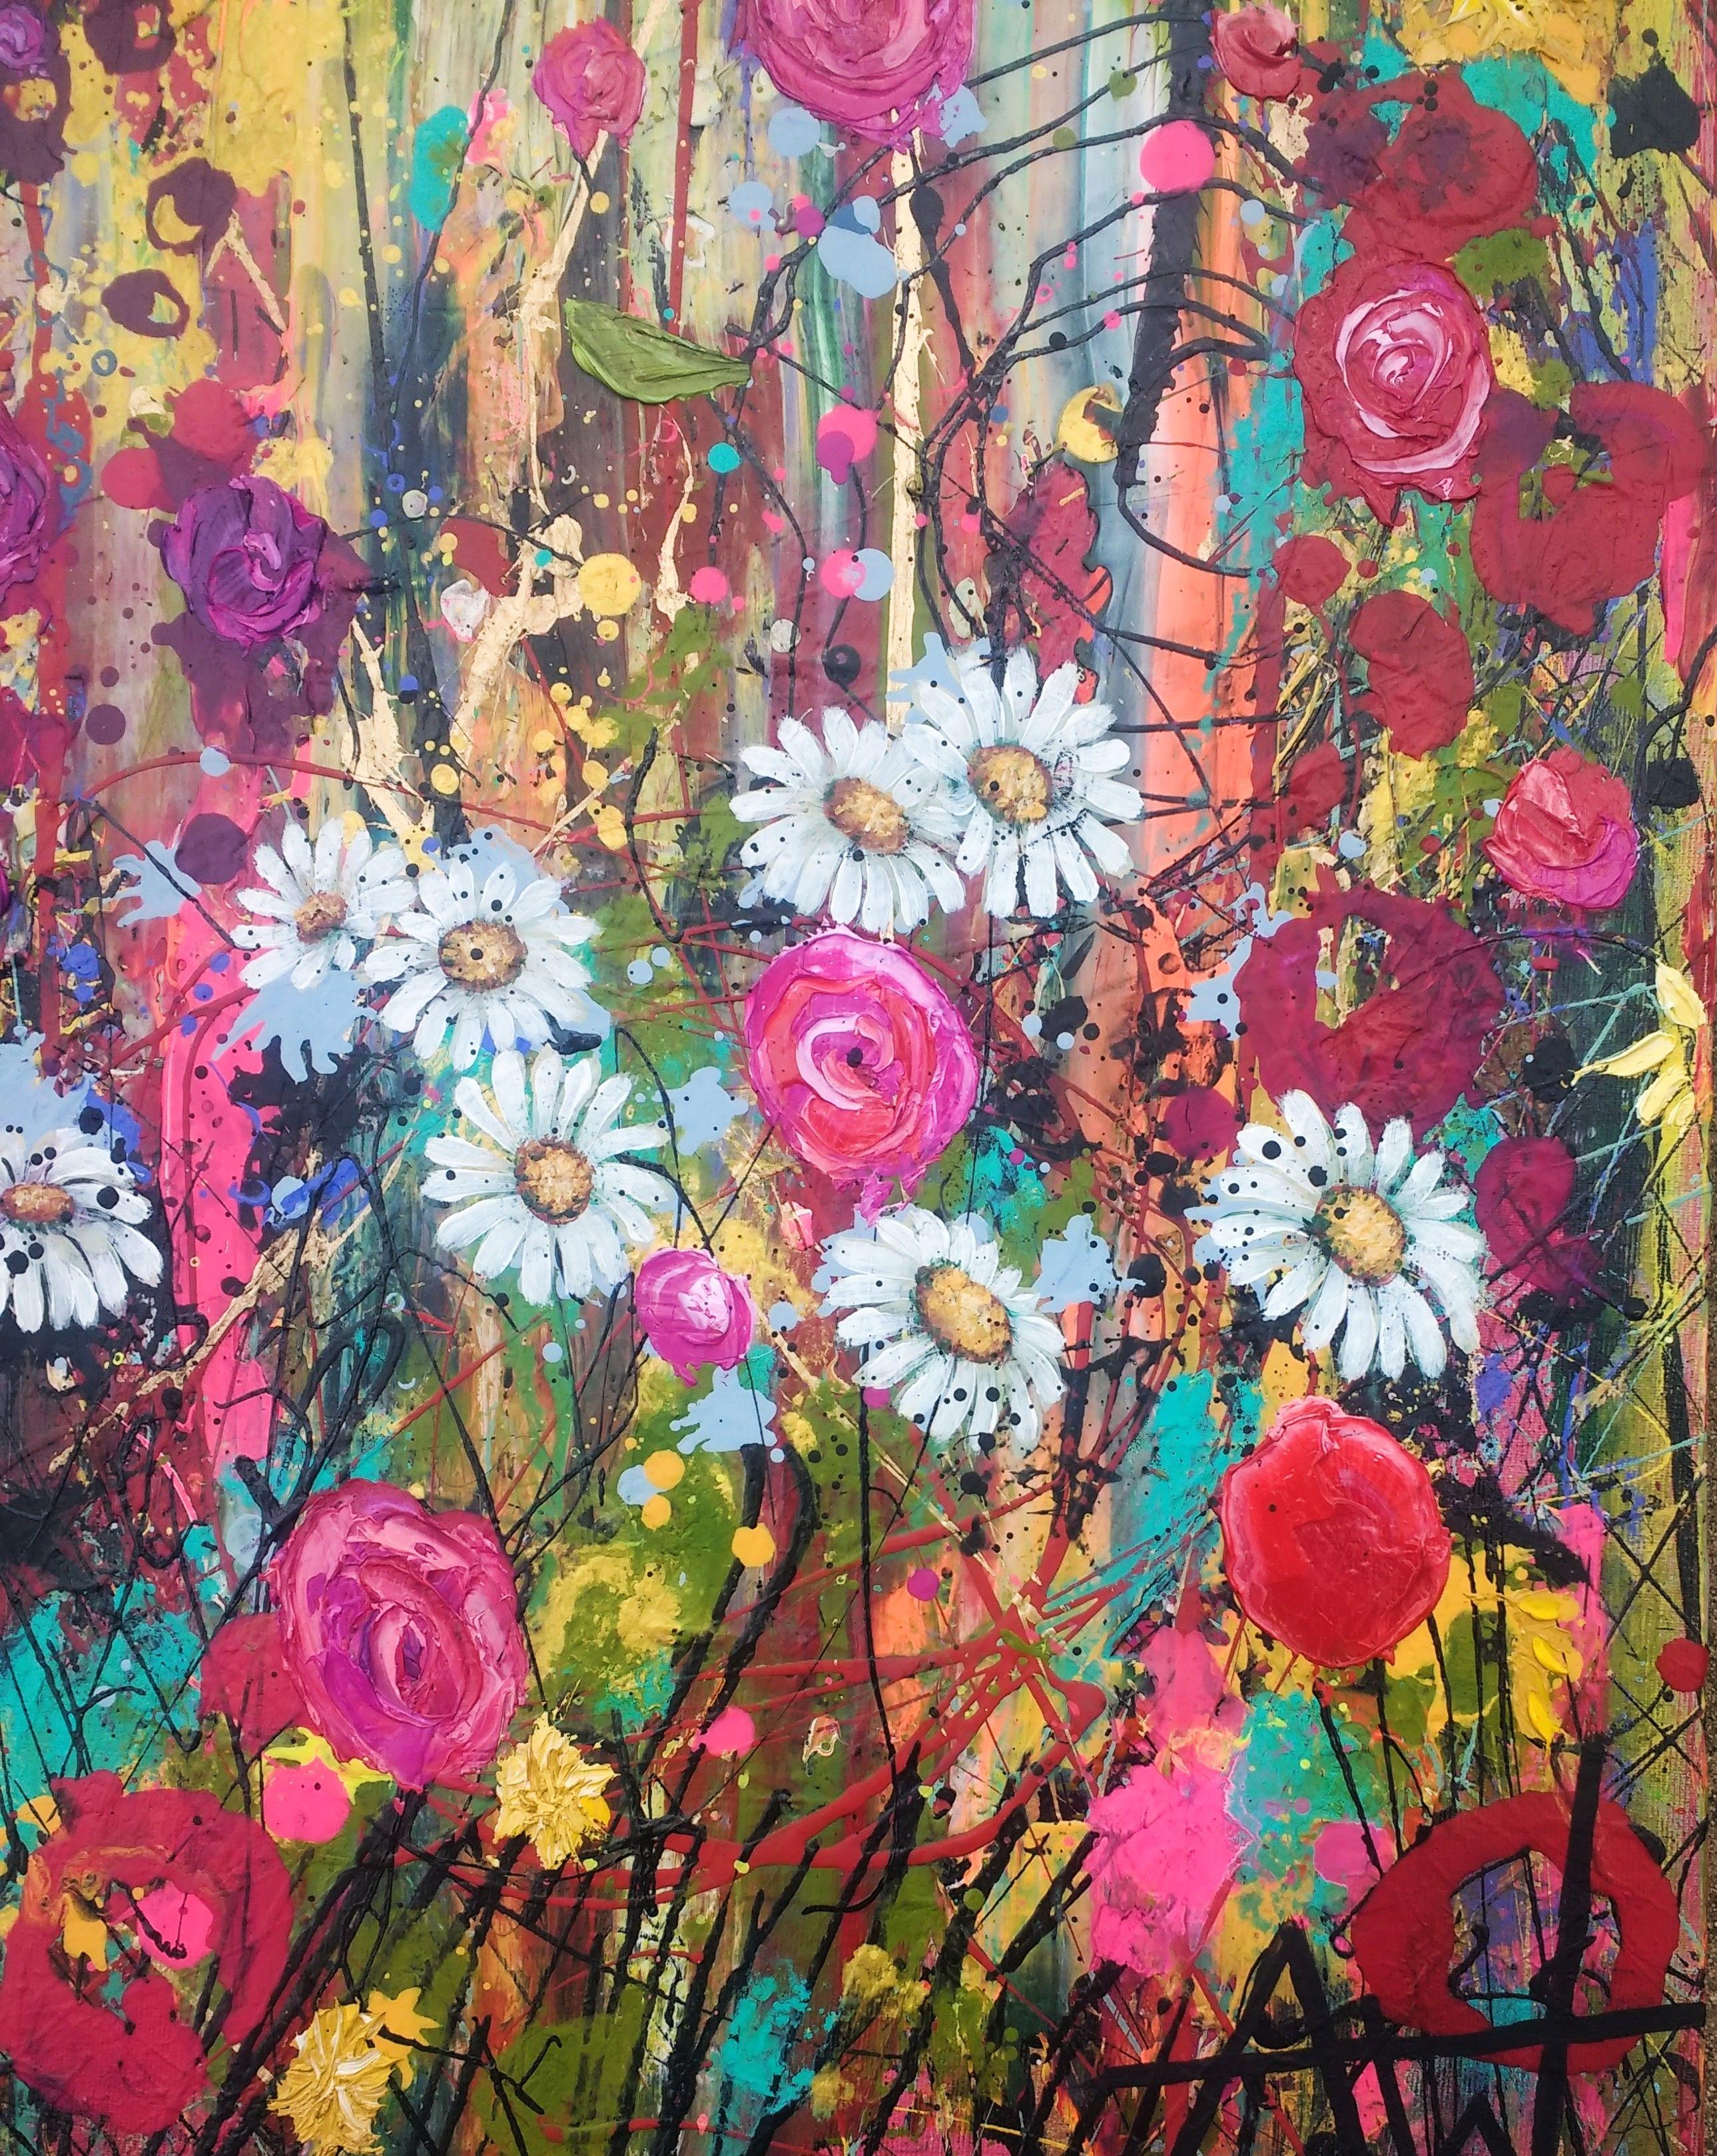 Harlequin, oil, acrylic and enamel on canvas,  100 x 120 x 3 cm  Harlequin, a feast of colour.  Exuberance abounds. A bounty of somersaulting flowers and chaotic vines. A wild and feral beauty. The Harlequin promises all is not as it seems. Delicate